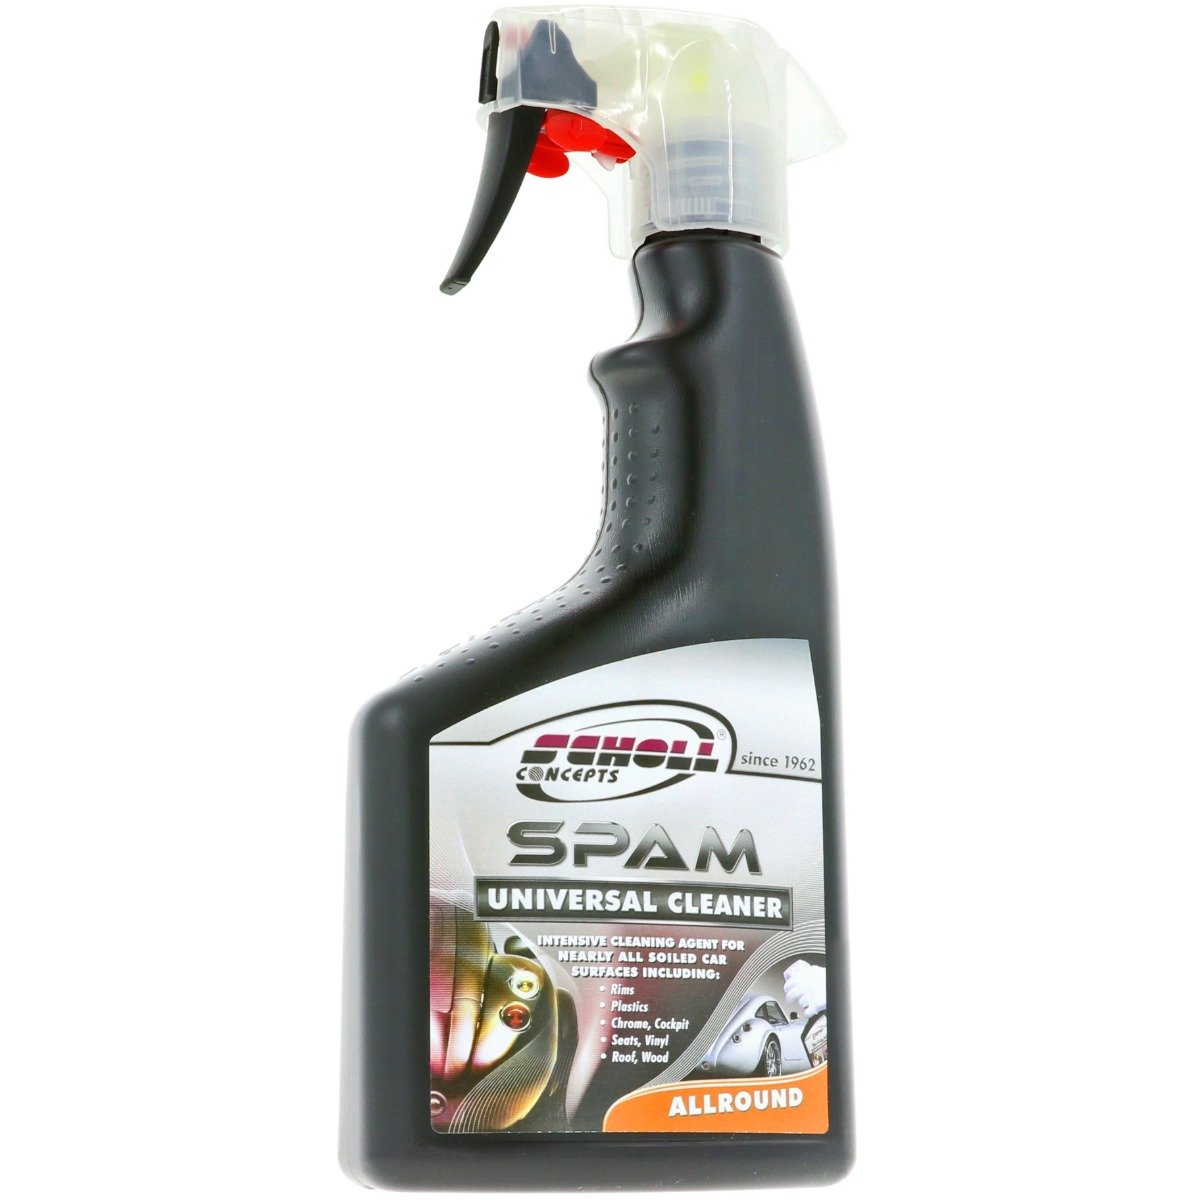 SPAM Universal Cleaner - 500ml